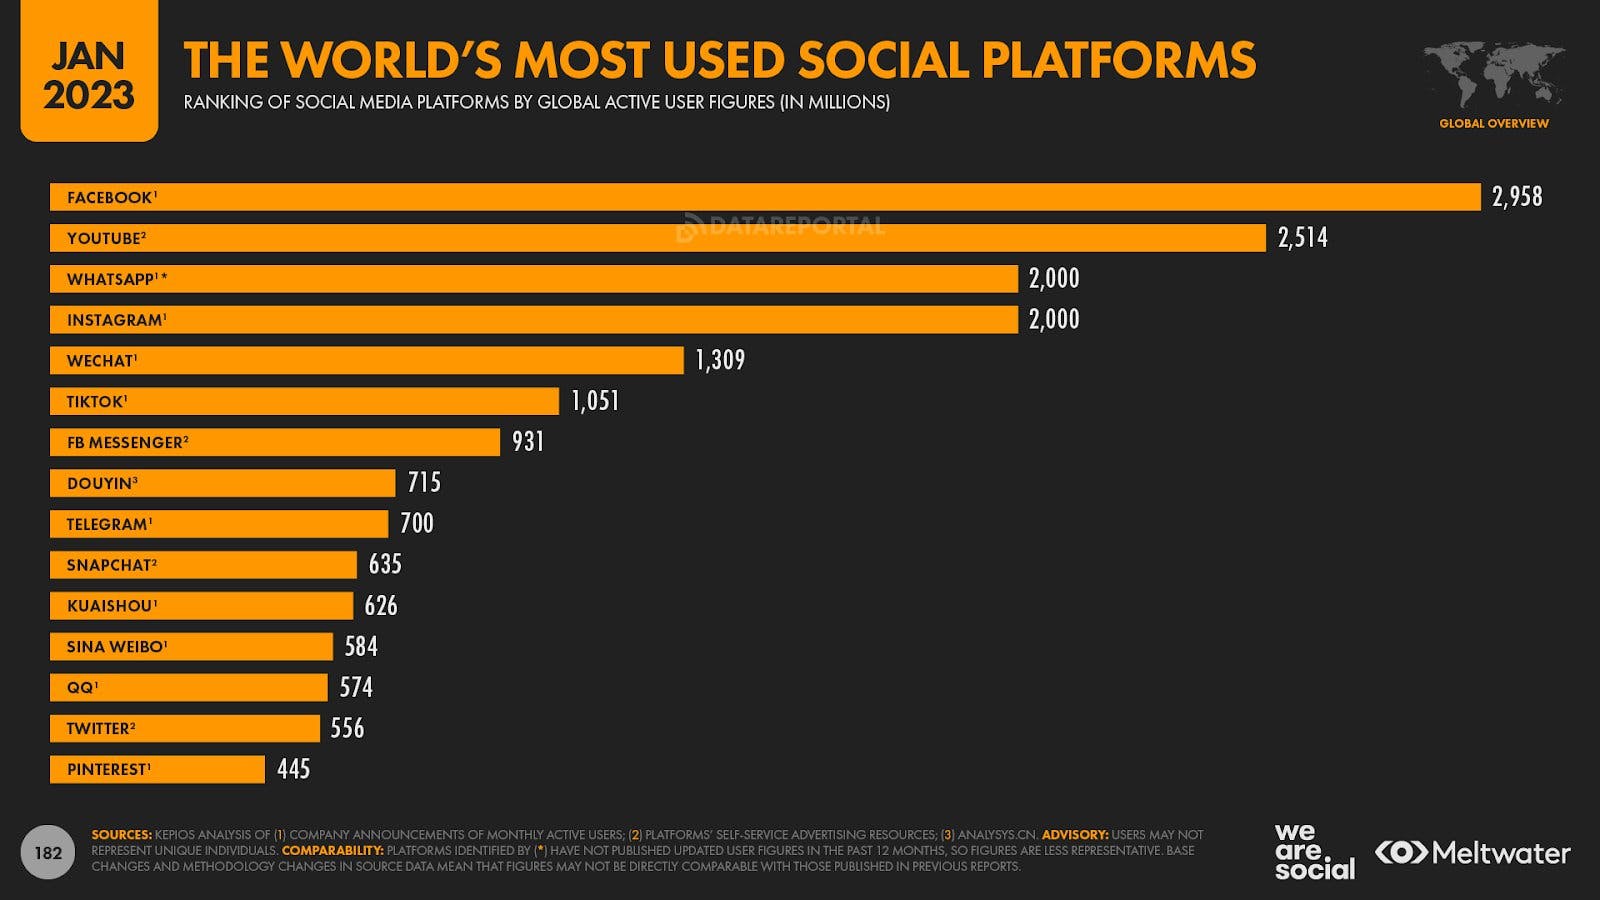 The World's Mst Used Social Platforms in January 2023